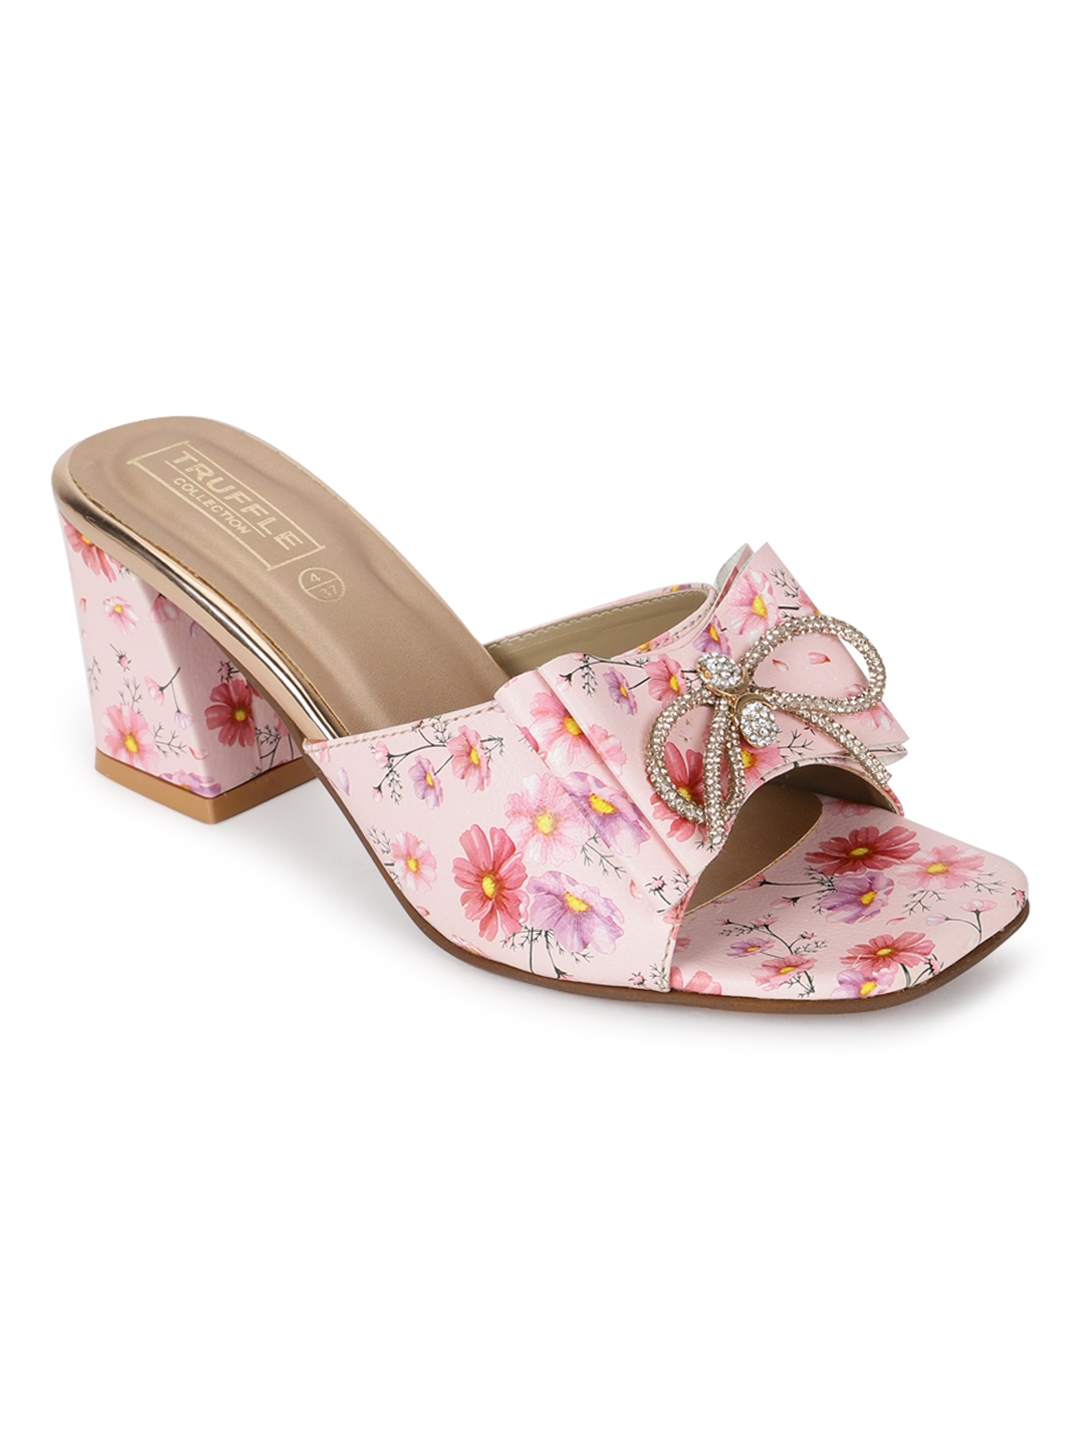 Truffle Collection | Pink PU Floral Diamante Bow Block Heel Mules